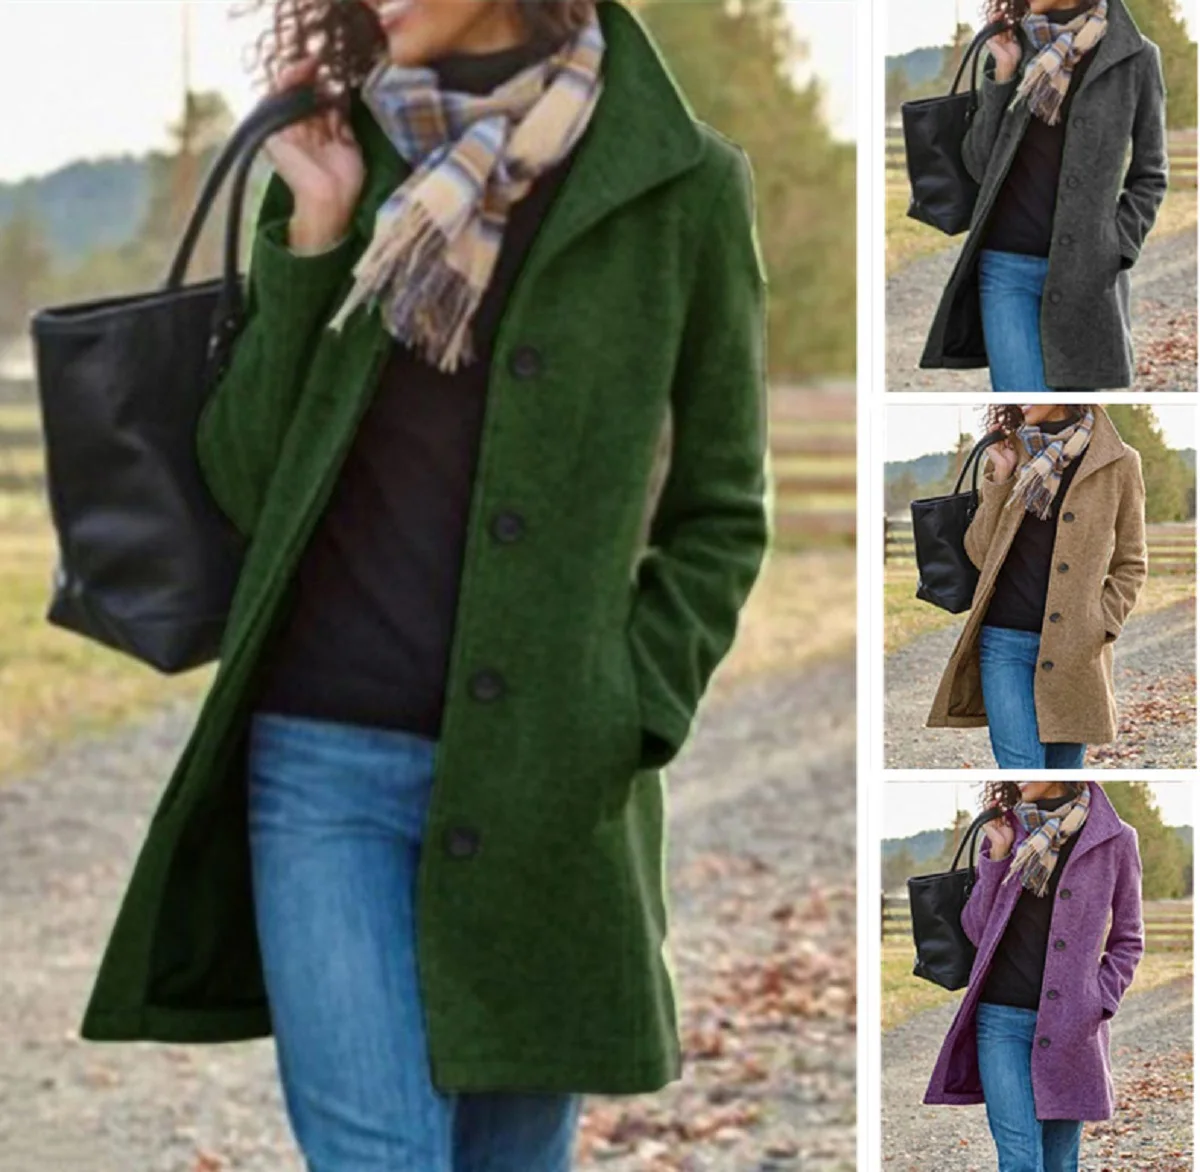 Autumn Winter Loose Maternity Thick Long Trench Coat Jacket Top Causal Women Single-Breasted Woolen Outwear Coat Capes Plus Size maternity clothes women jacket coat outwear fleece hoodies autumn winter casual lady hooded long trench coat overcoat plus size